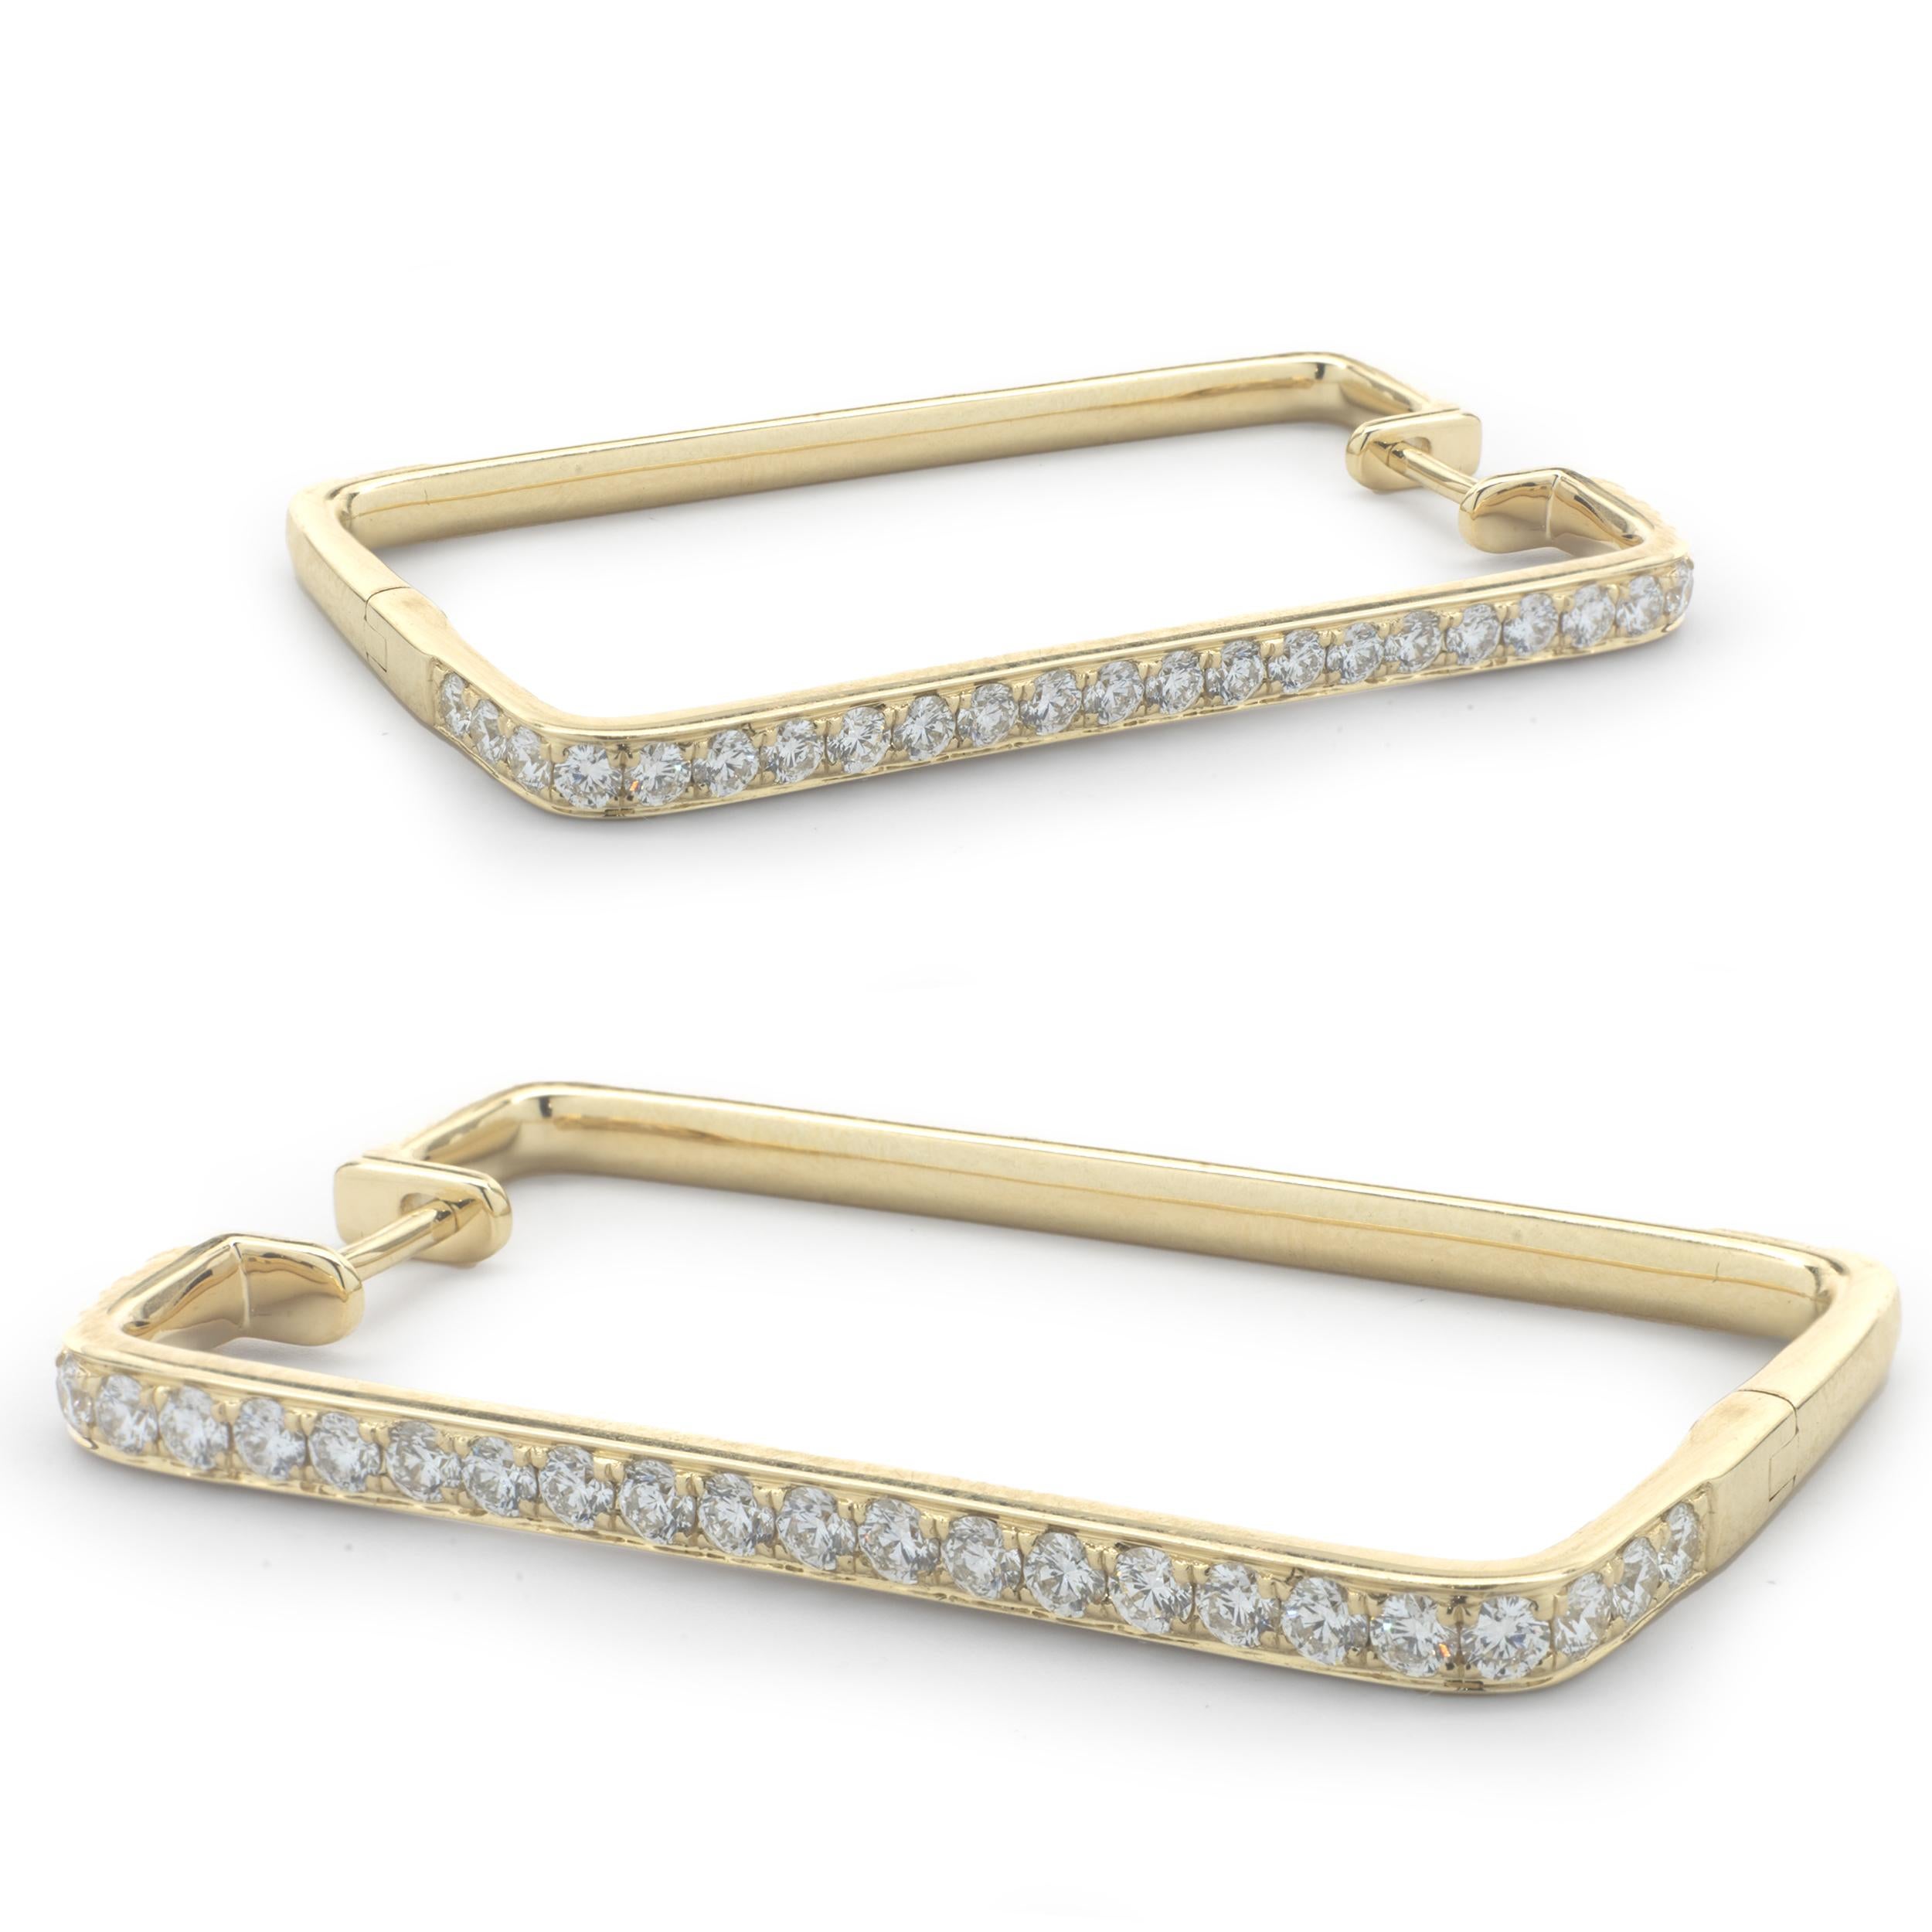 Designer: custom
Material: 14K yellow gold
Diamond: 50 round brilliant diamonds= 1.26cttw
Color: G
Clarity: VS
Dimensions: earrings measure 36mm round
Fastenings: post with snap backs
Weight: 9.96 grams
